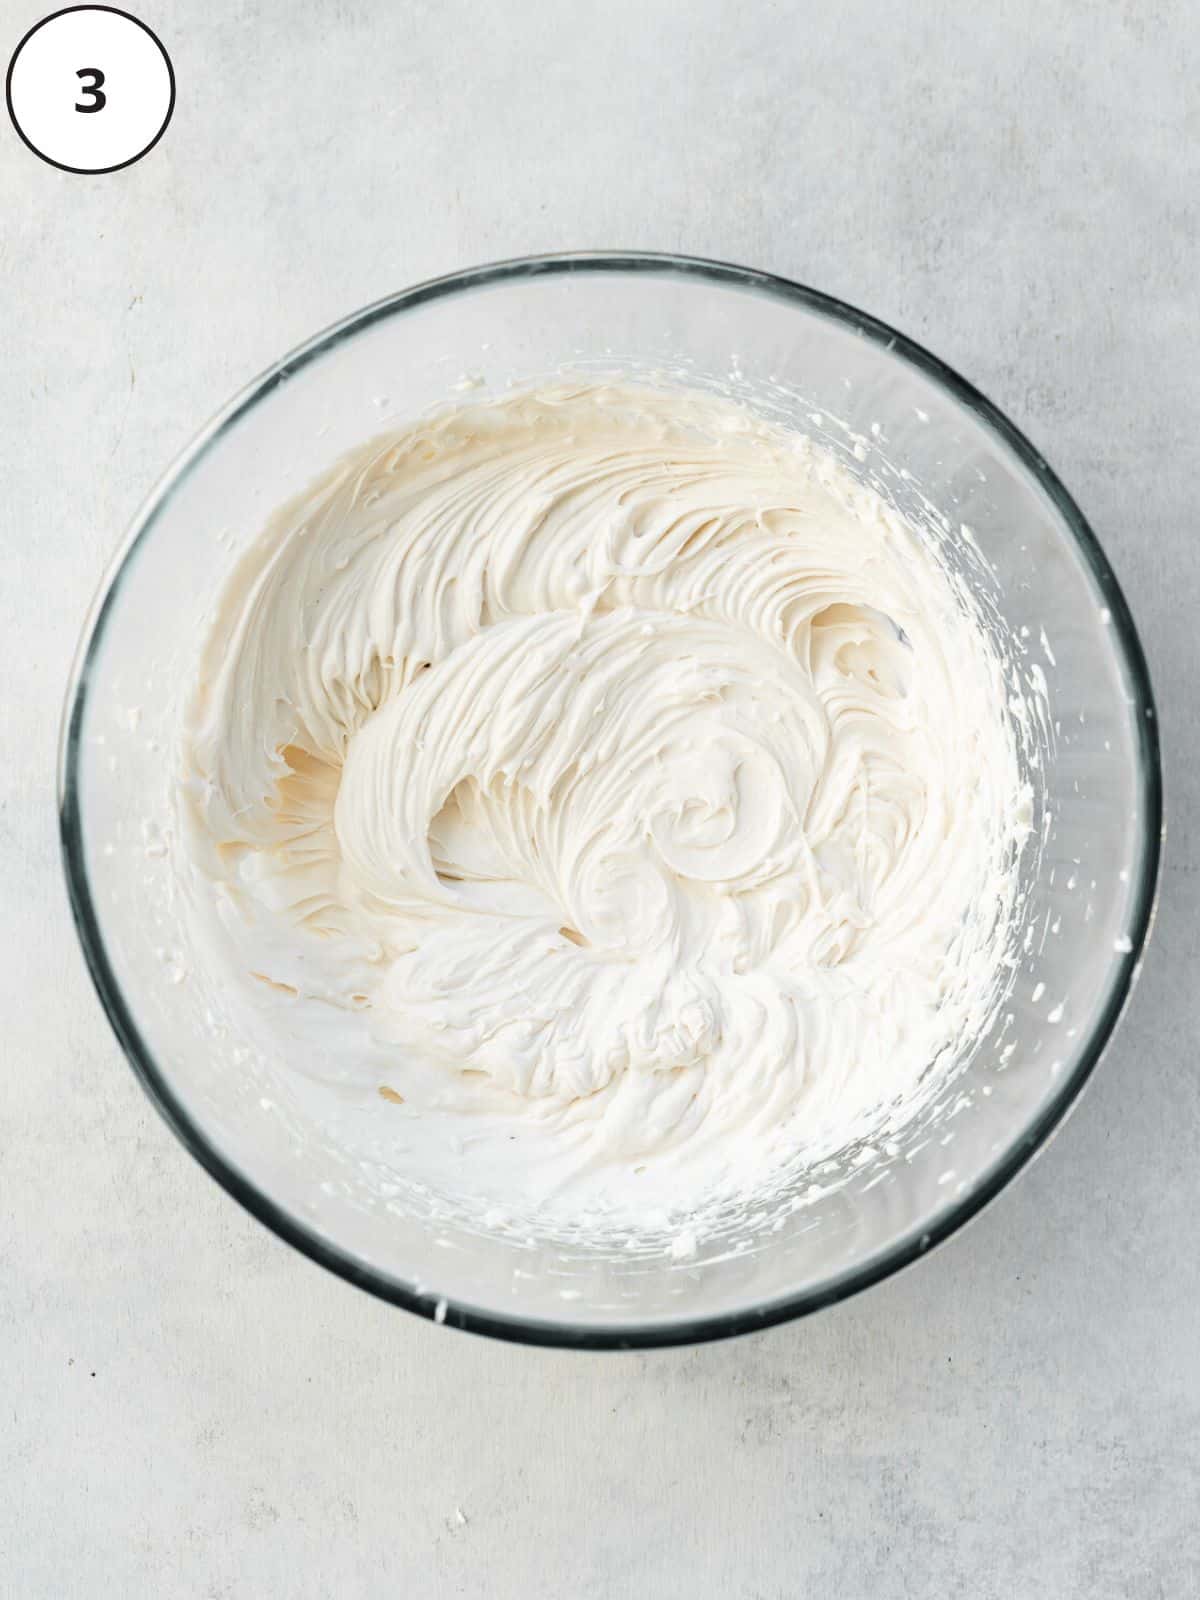 whipped custard and cream in a bowl to make dairy-free vanilla ice cream.